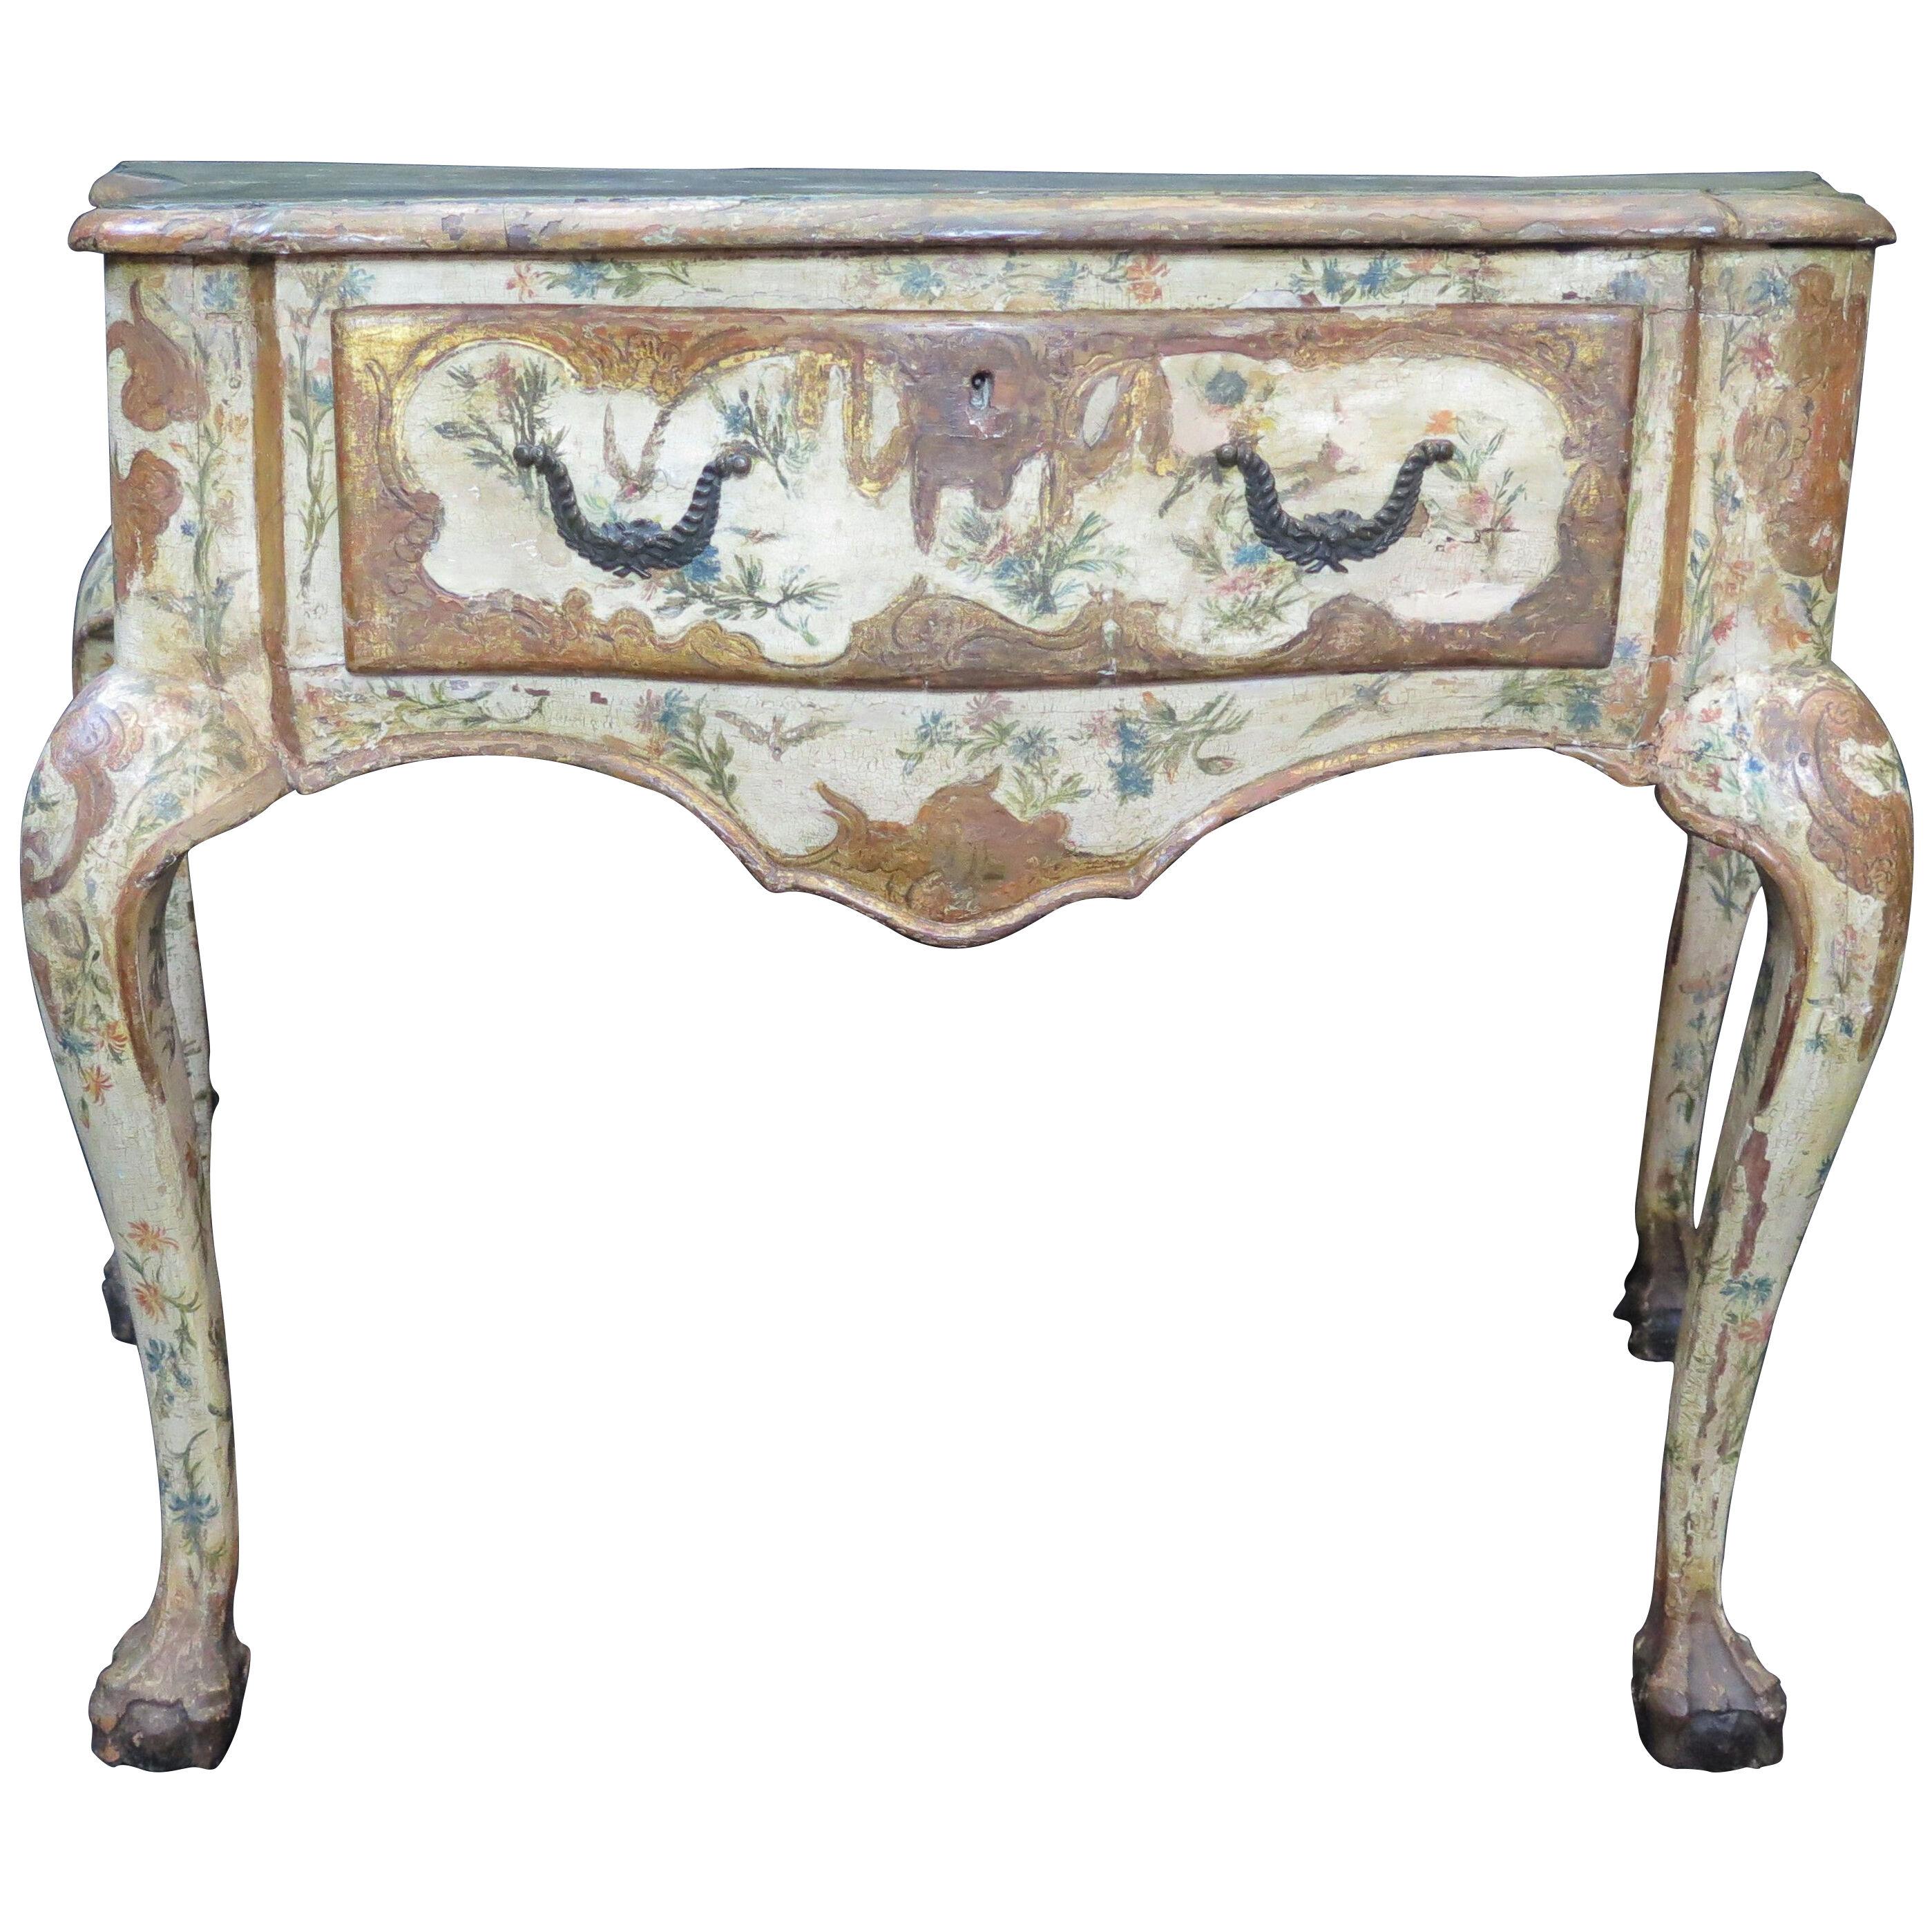 Early 18th Century Italian Painted Side Table